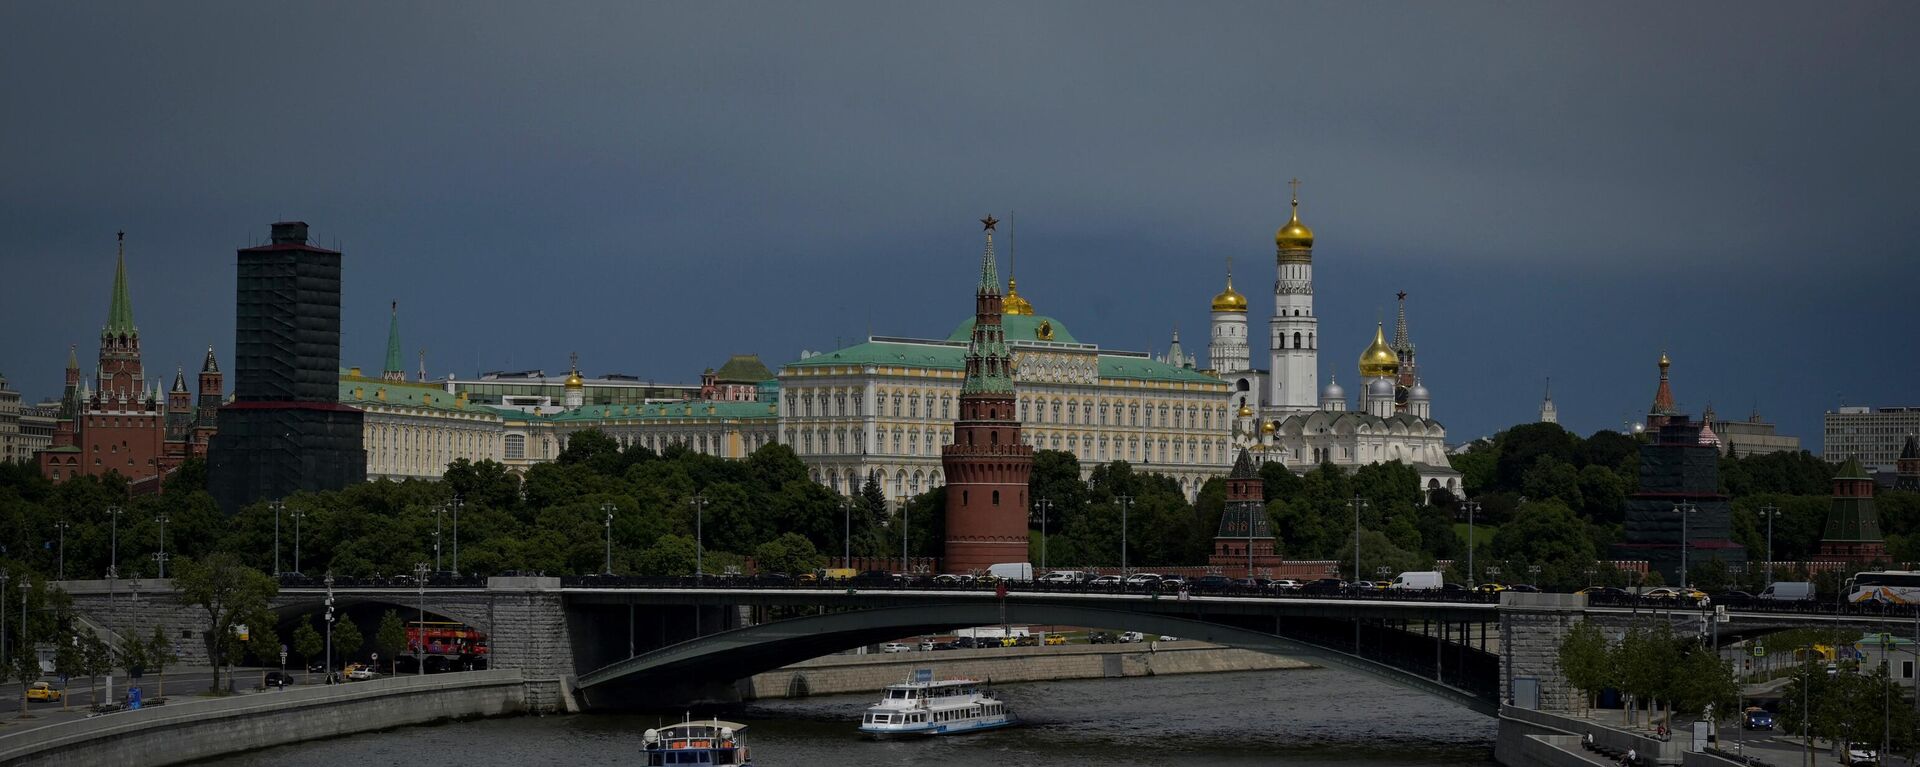 Boats sail on the Moskva river as dark rain clouds loom over the Kremlin in central Moscow on June 17, 2022. - Sputnik International, 1920, 23.06.2022